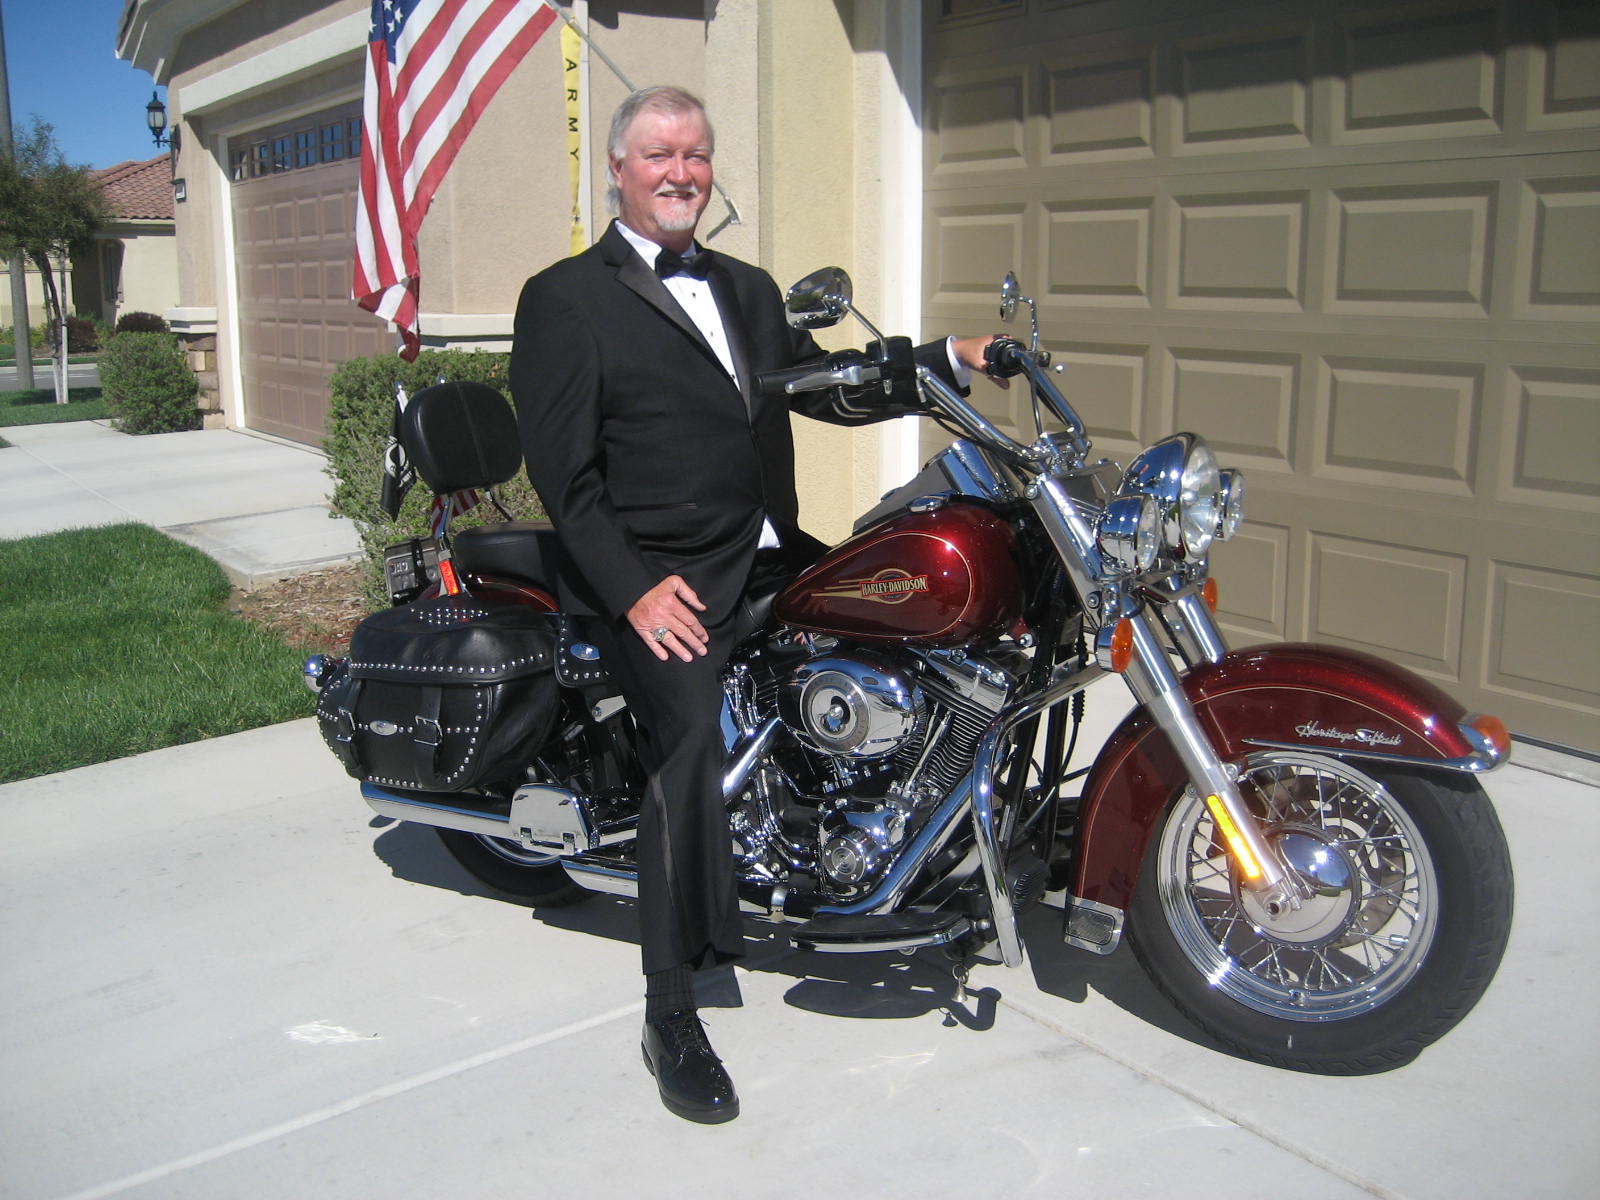 It's my daughter's wedding day. Do I go riding or go to her wedding? Think I'll ride my motorcycle to her wedding.